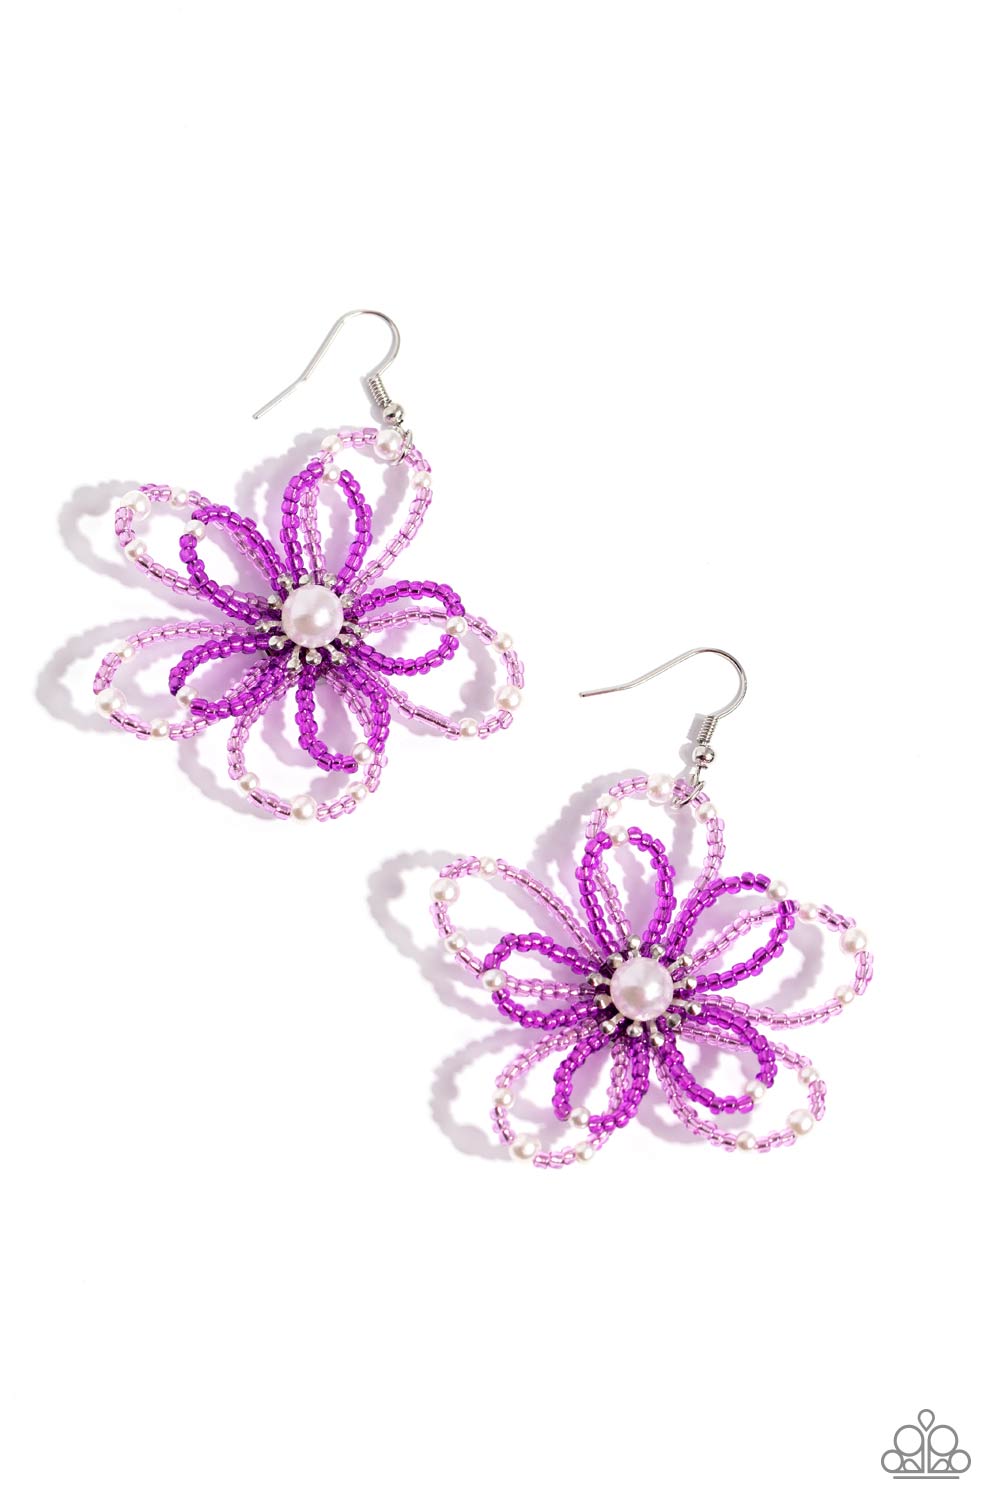 PEARL Crush Purple Seed Bead Flower Earring - Paparazzi Accessories  A glossy white pearl blooms from the center of a layered Rose Violet and plum glassy seed bead flower, infused with additional dainty white pearls, creating a colorful floral frame. Earring attaches to a standard fishhook fitting.  Sold as one pair of earrings.  SKU: P5ST-PRXX-027XX